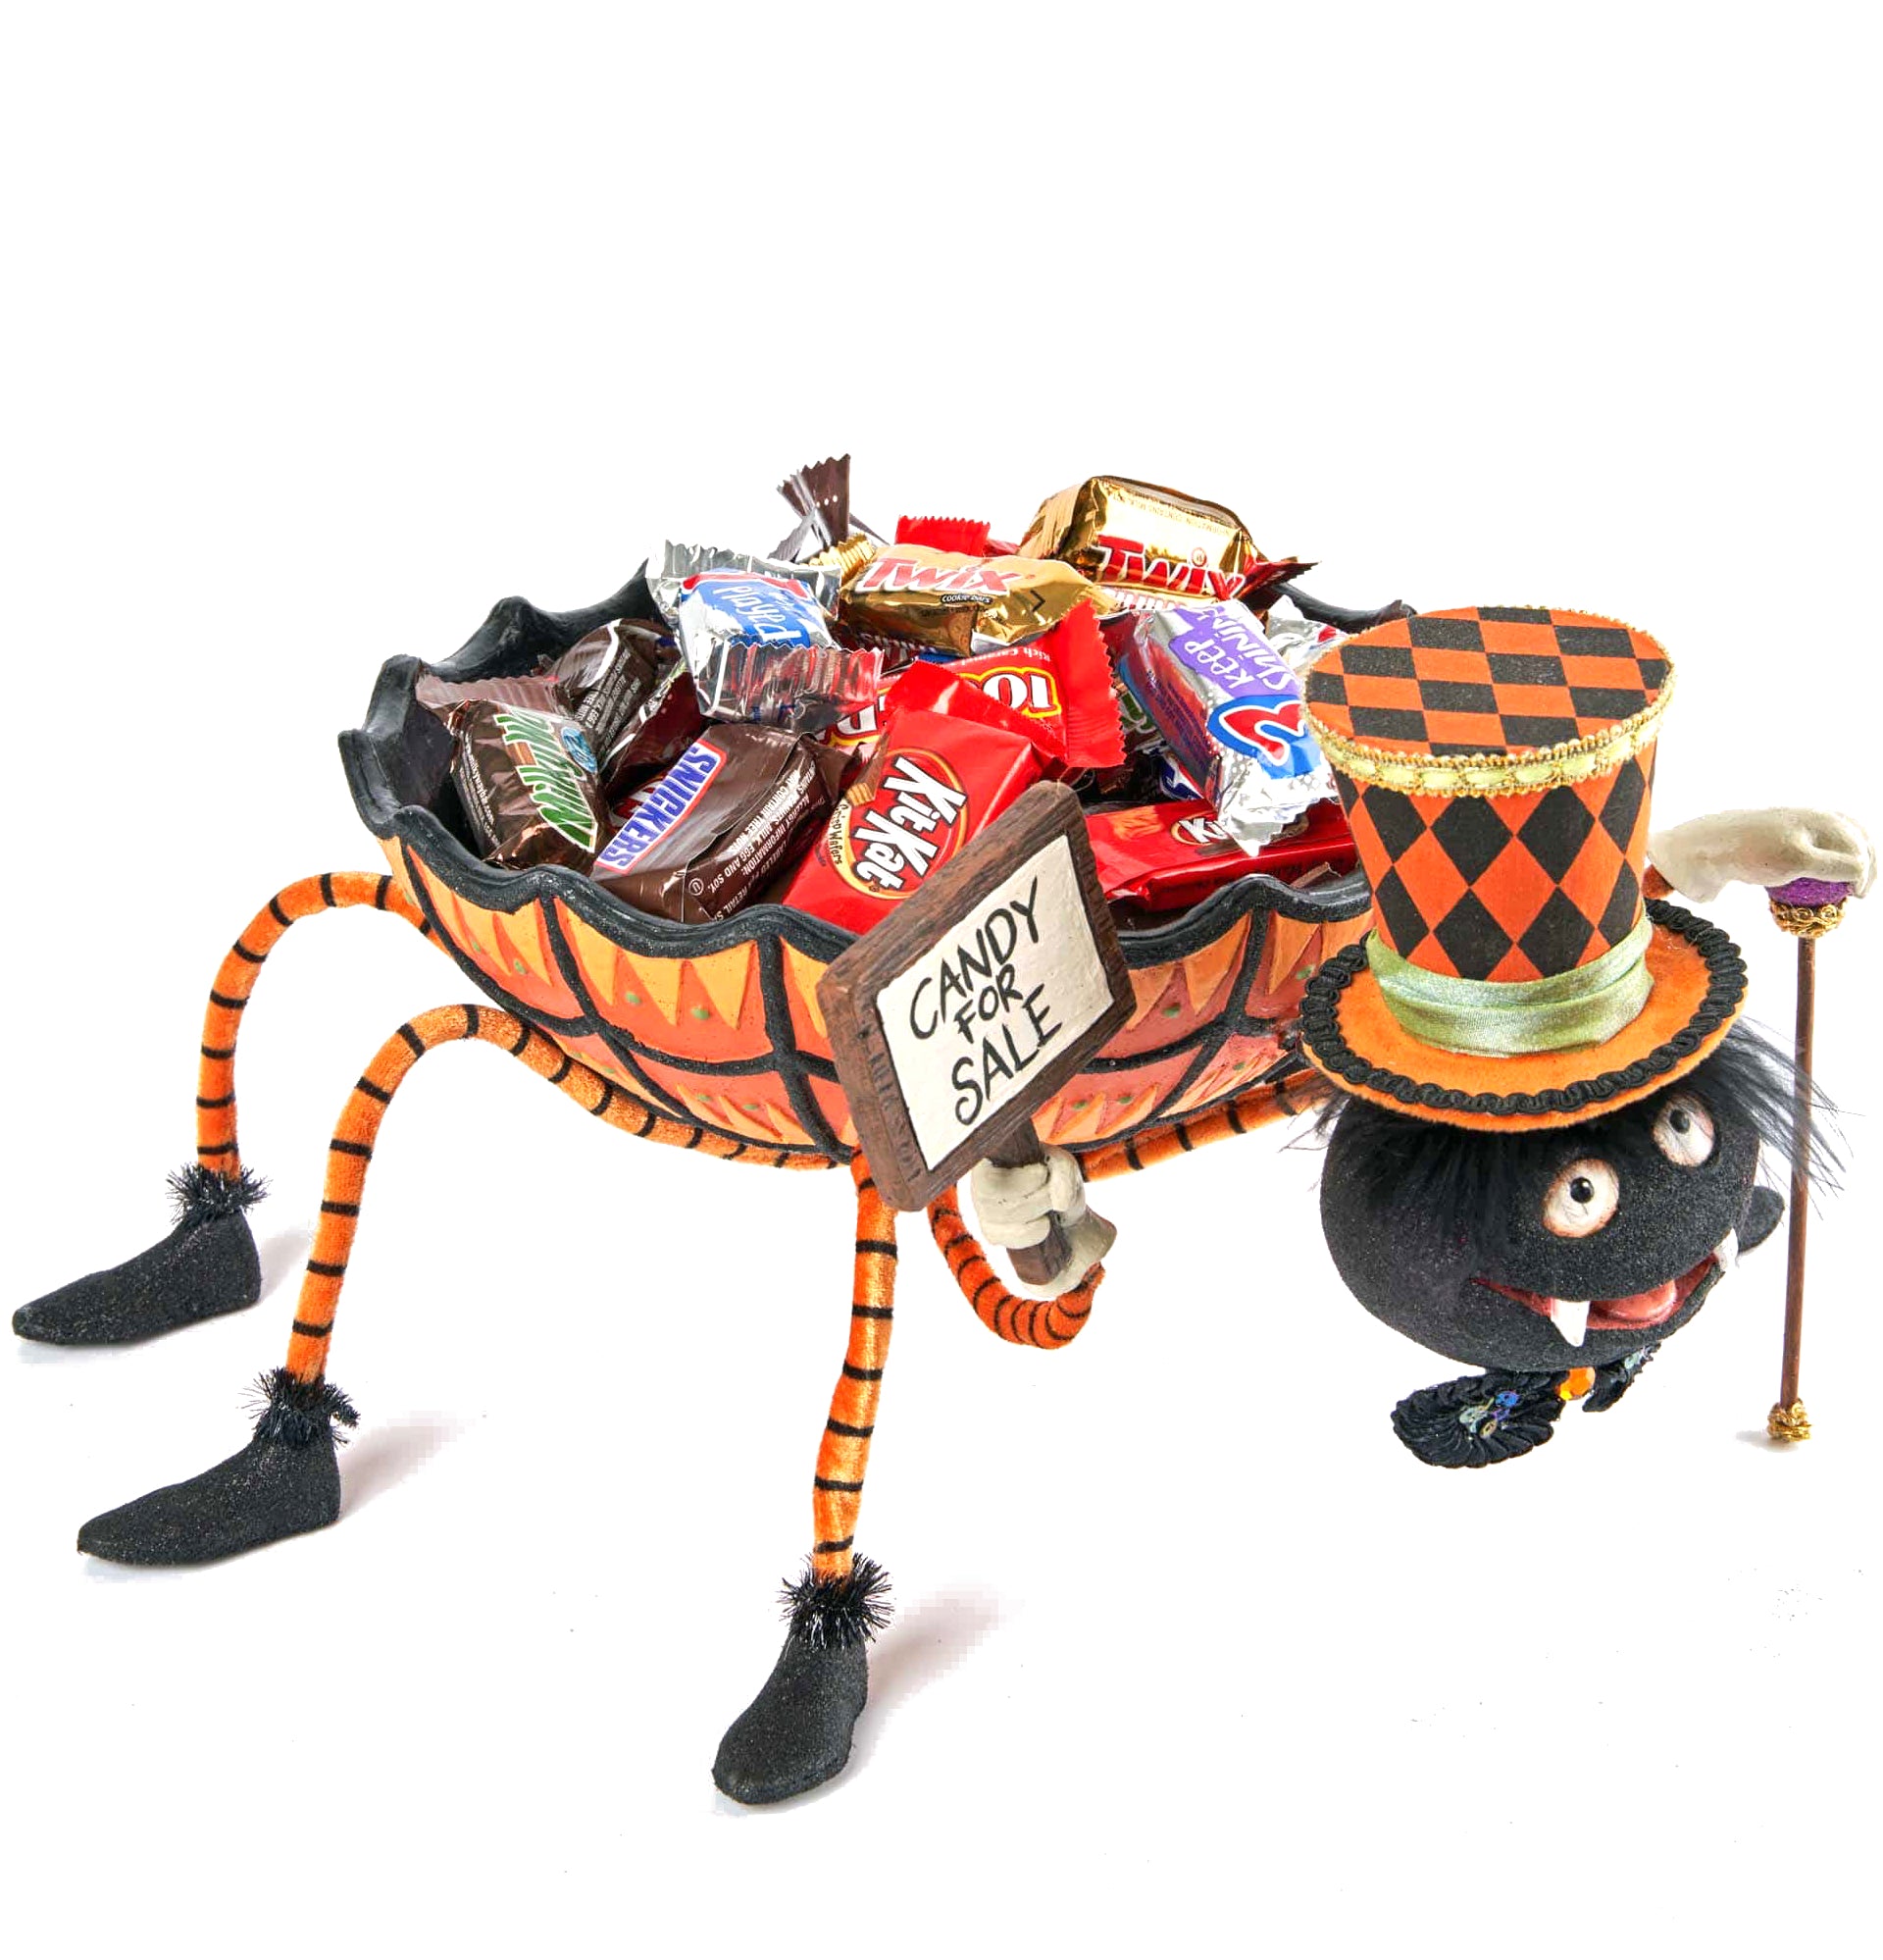 Katherine's Collection Silly Spider Candy Bowl with Top Hat & Candy for Sale Sign